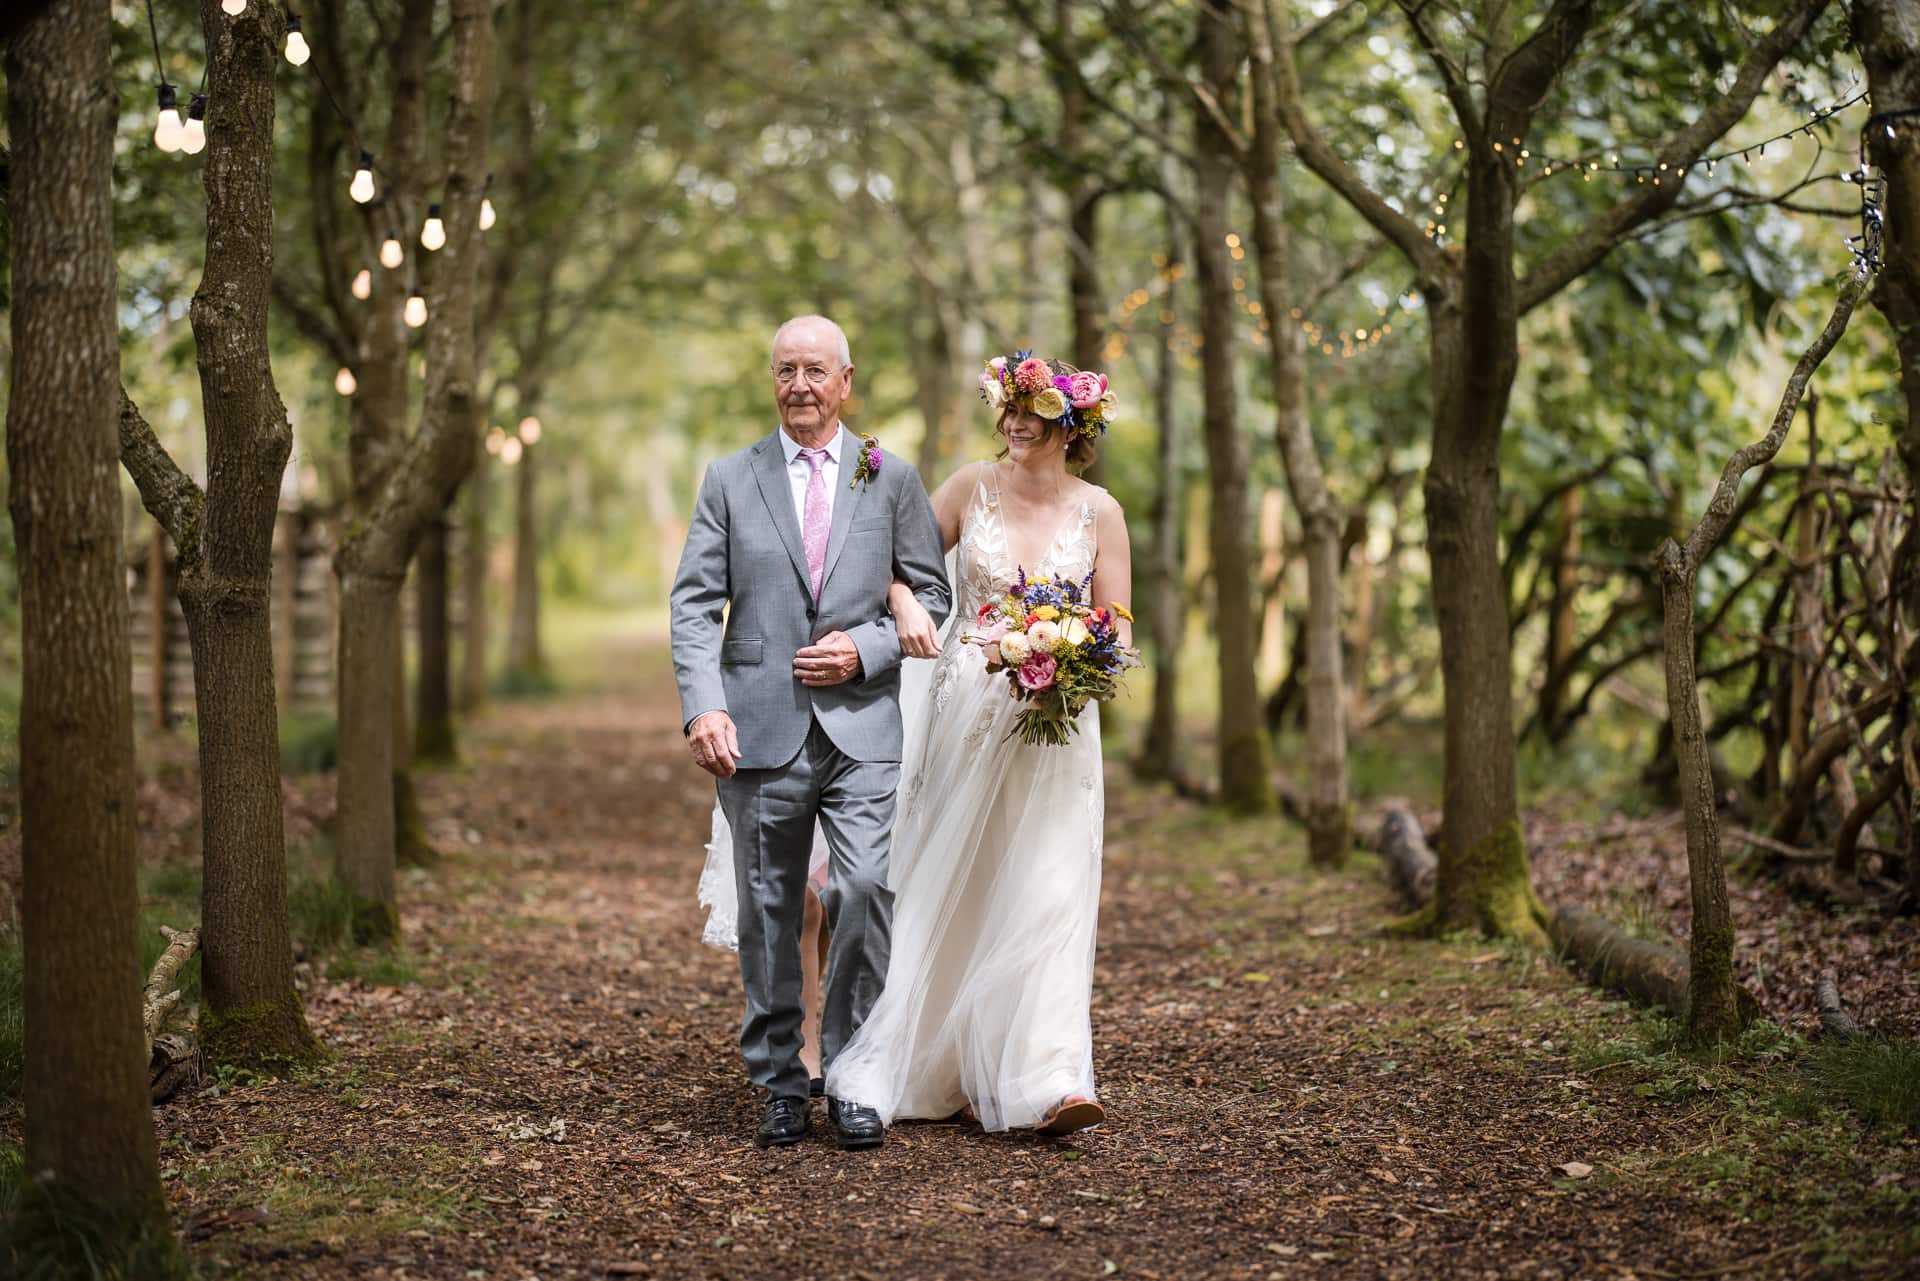 Father and Bride arrive at the Endeavour Woodland wedding venue